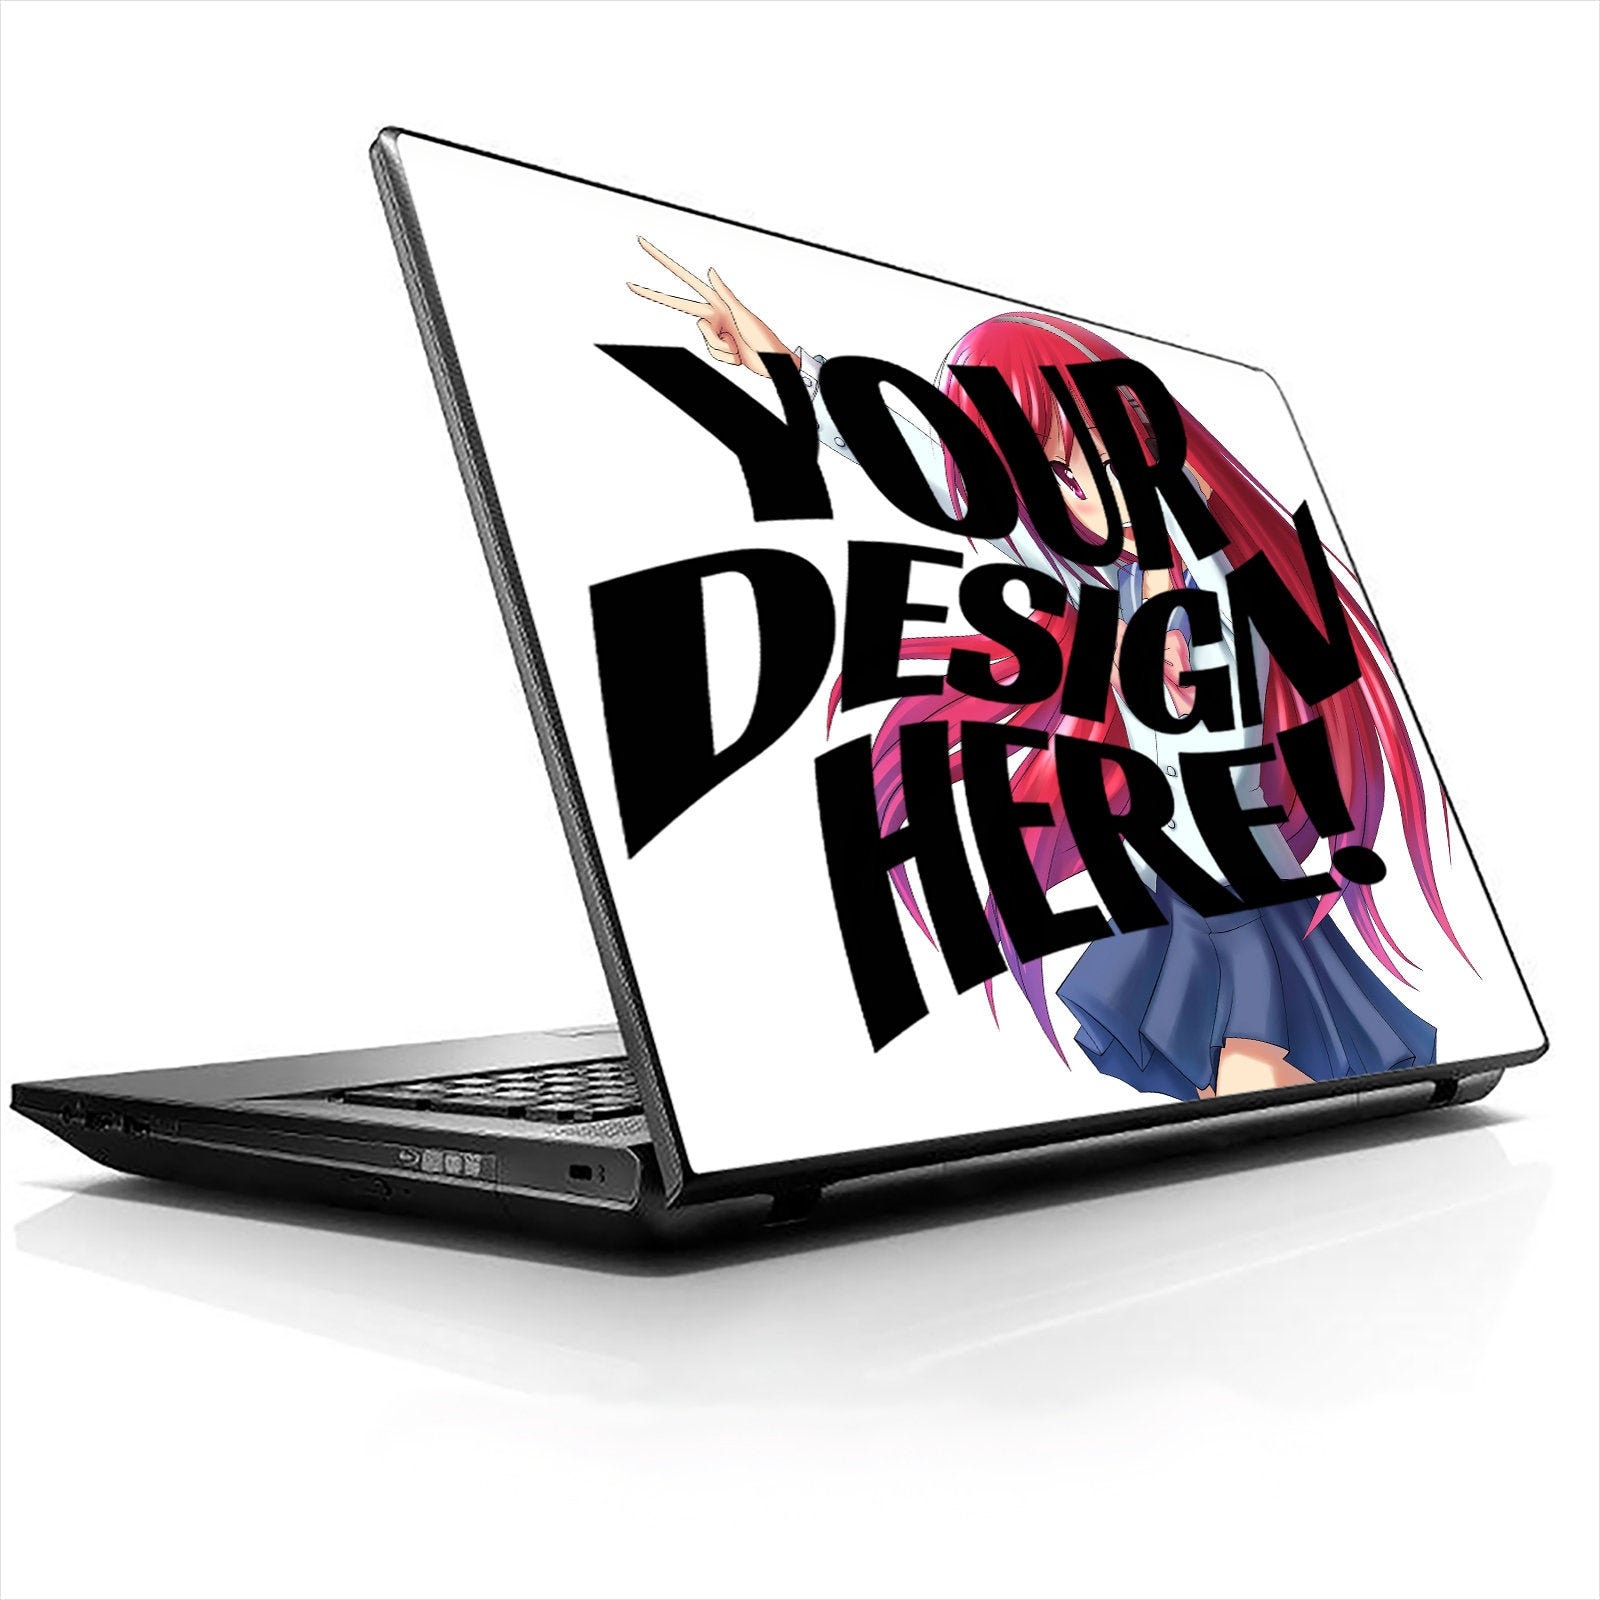 GADGETS WRAP Printed Vinyl Top Only Skin Sticker Decal for Acer